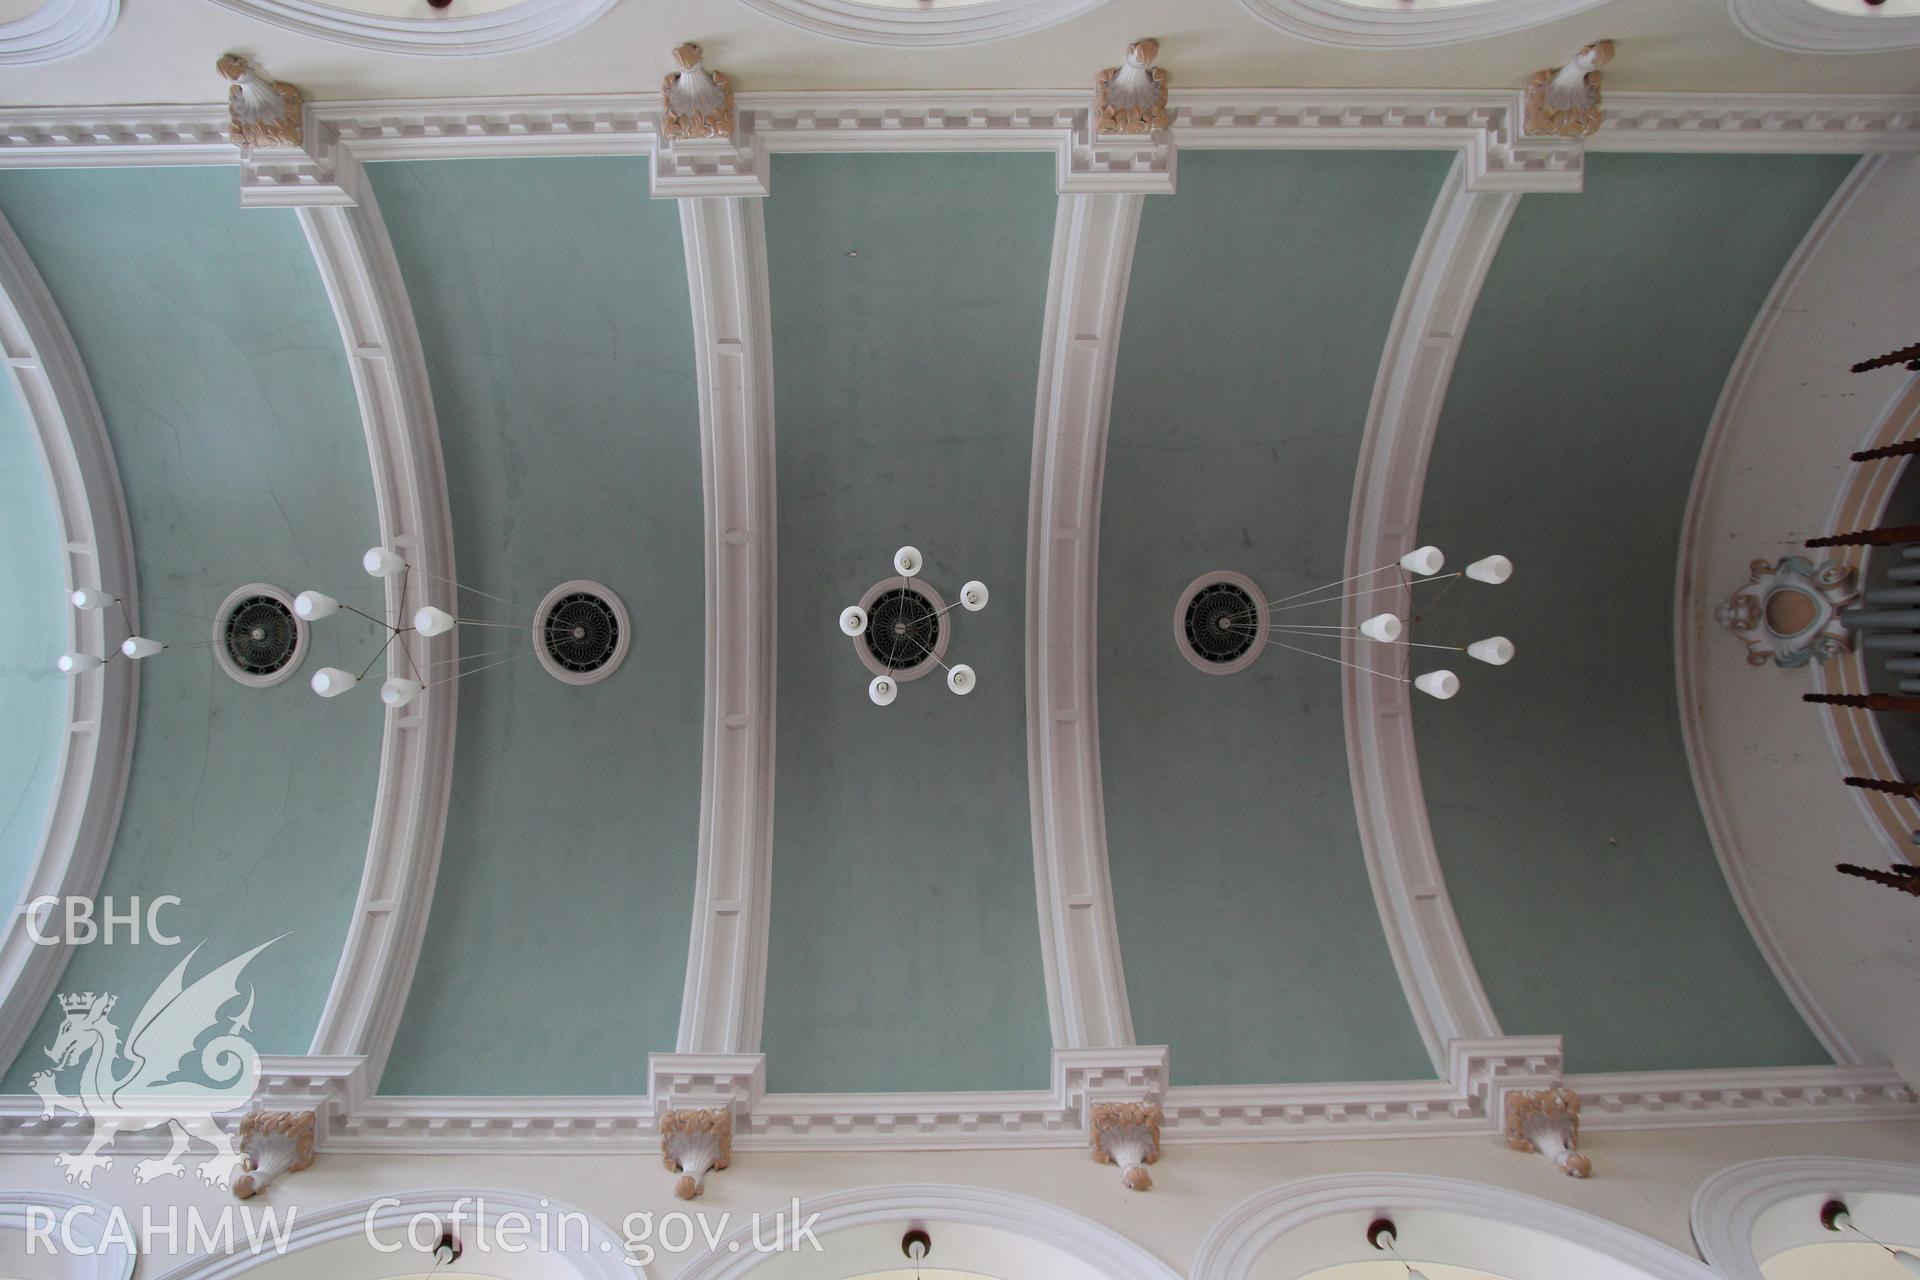 Bethel Independent Chapel, Pen-Clawdd, ceiling of main interior.